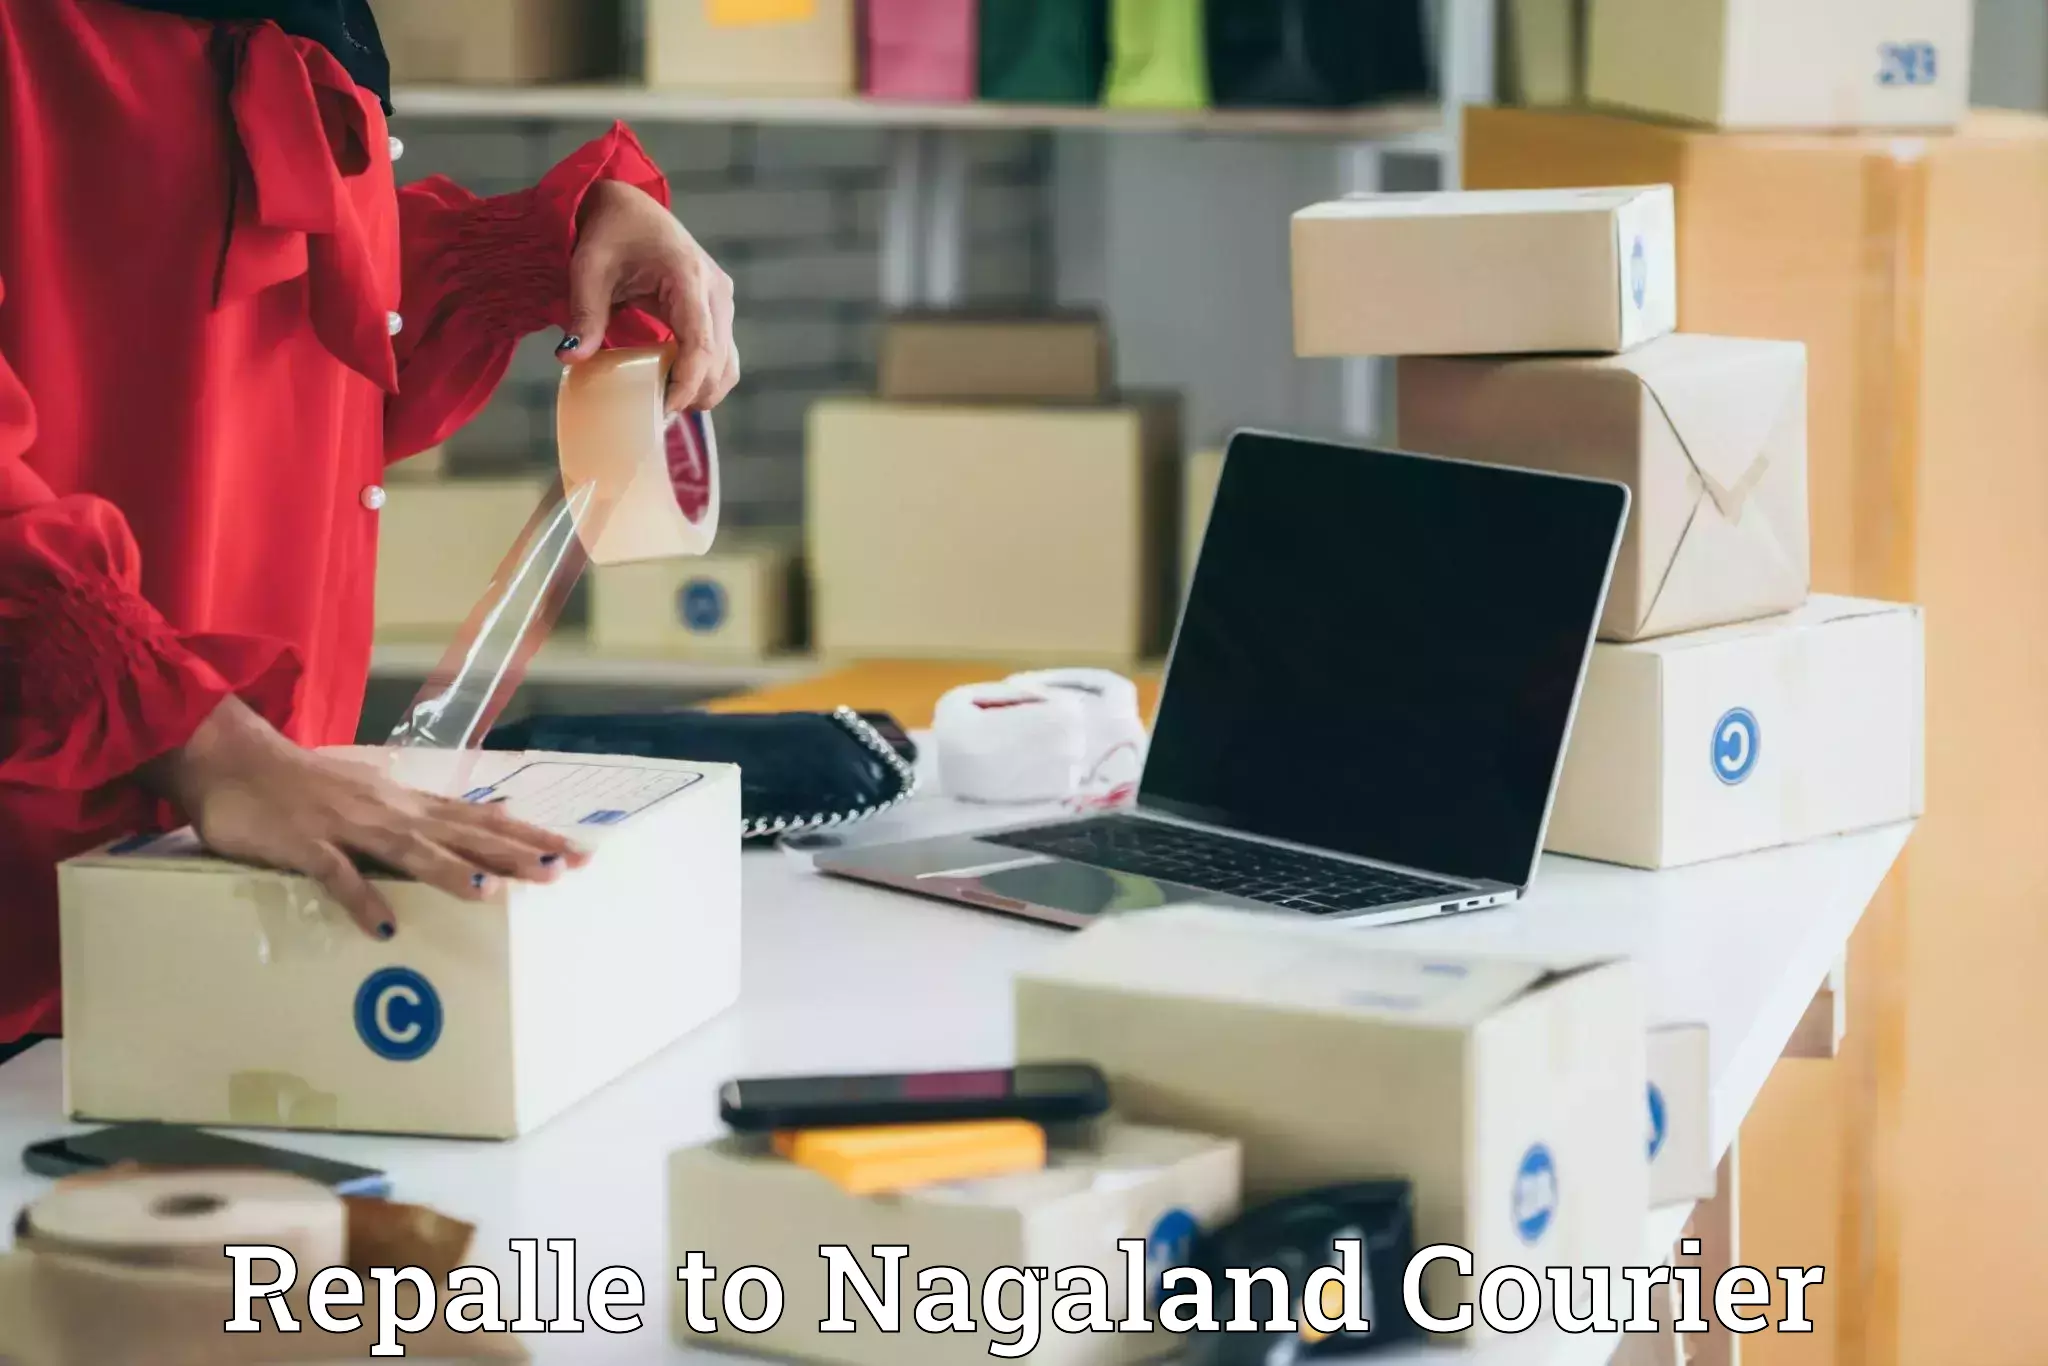 Baggage transport management Repalle to Nagaland